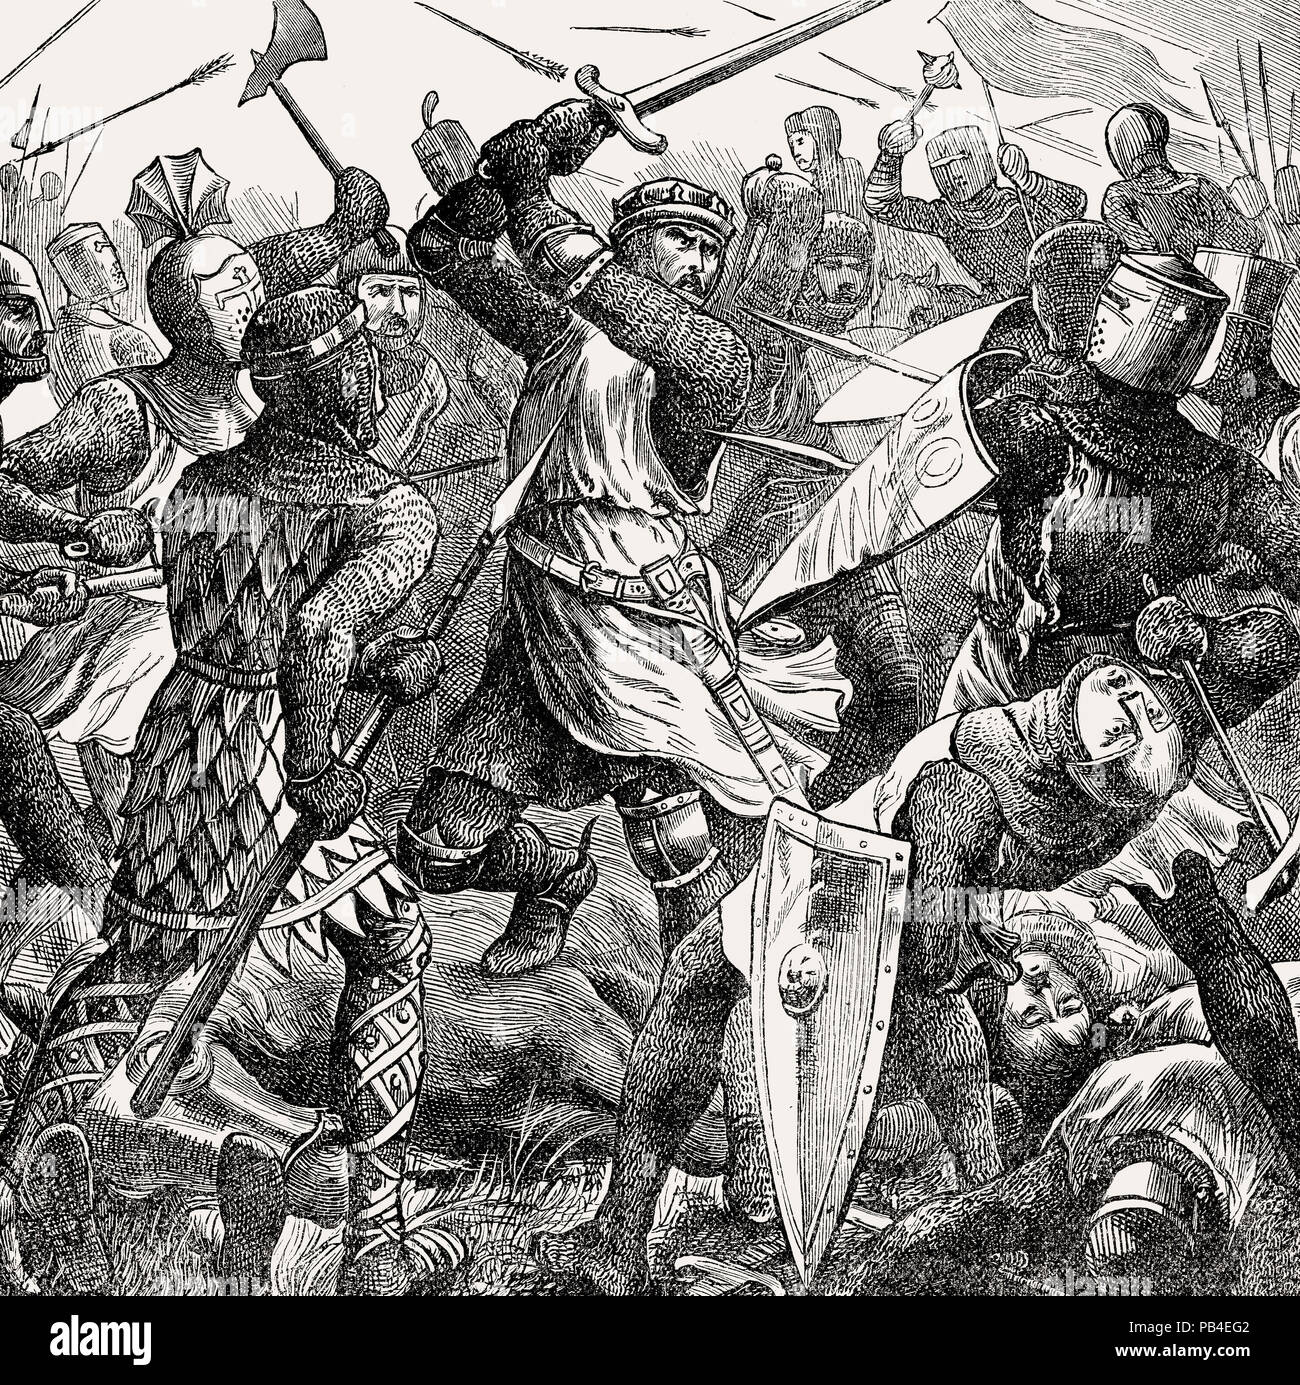 Prince Edward  at the Battle of Evesham on 4 August 1265, Second Barons' War, From British Battles on Land and Sea, by James Grant Stock Photo